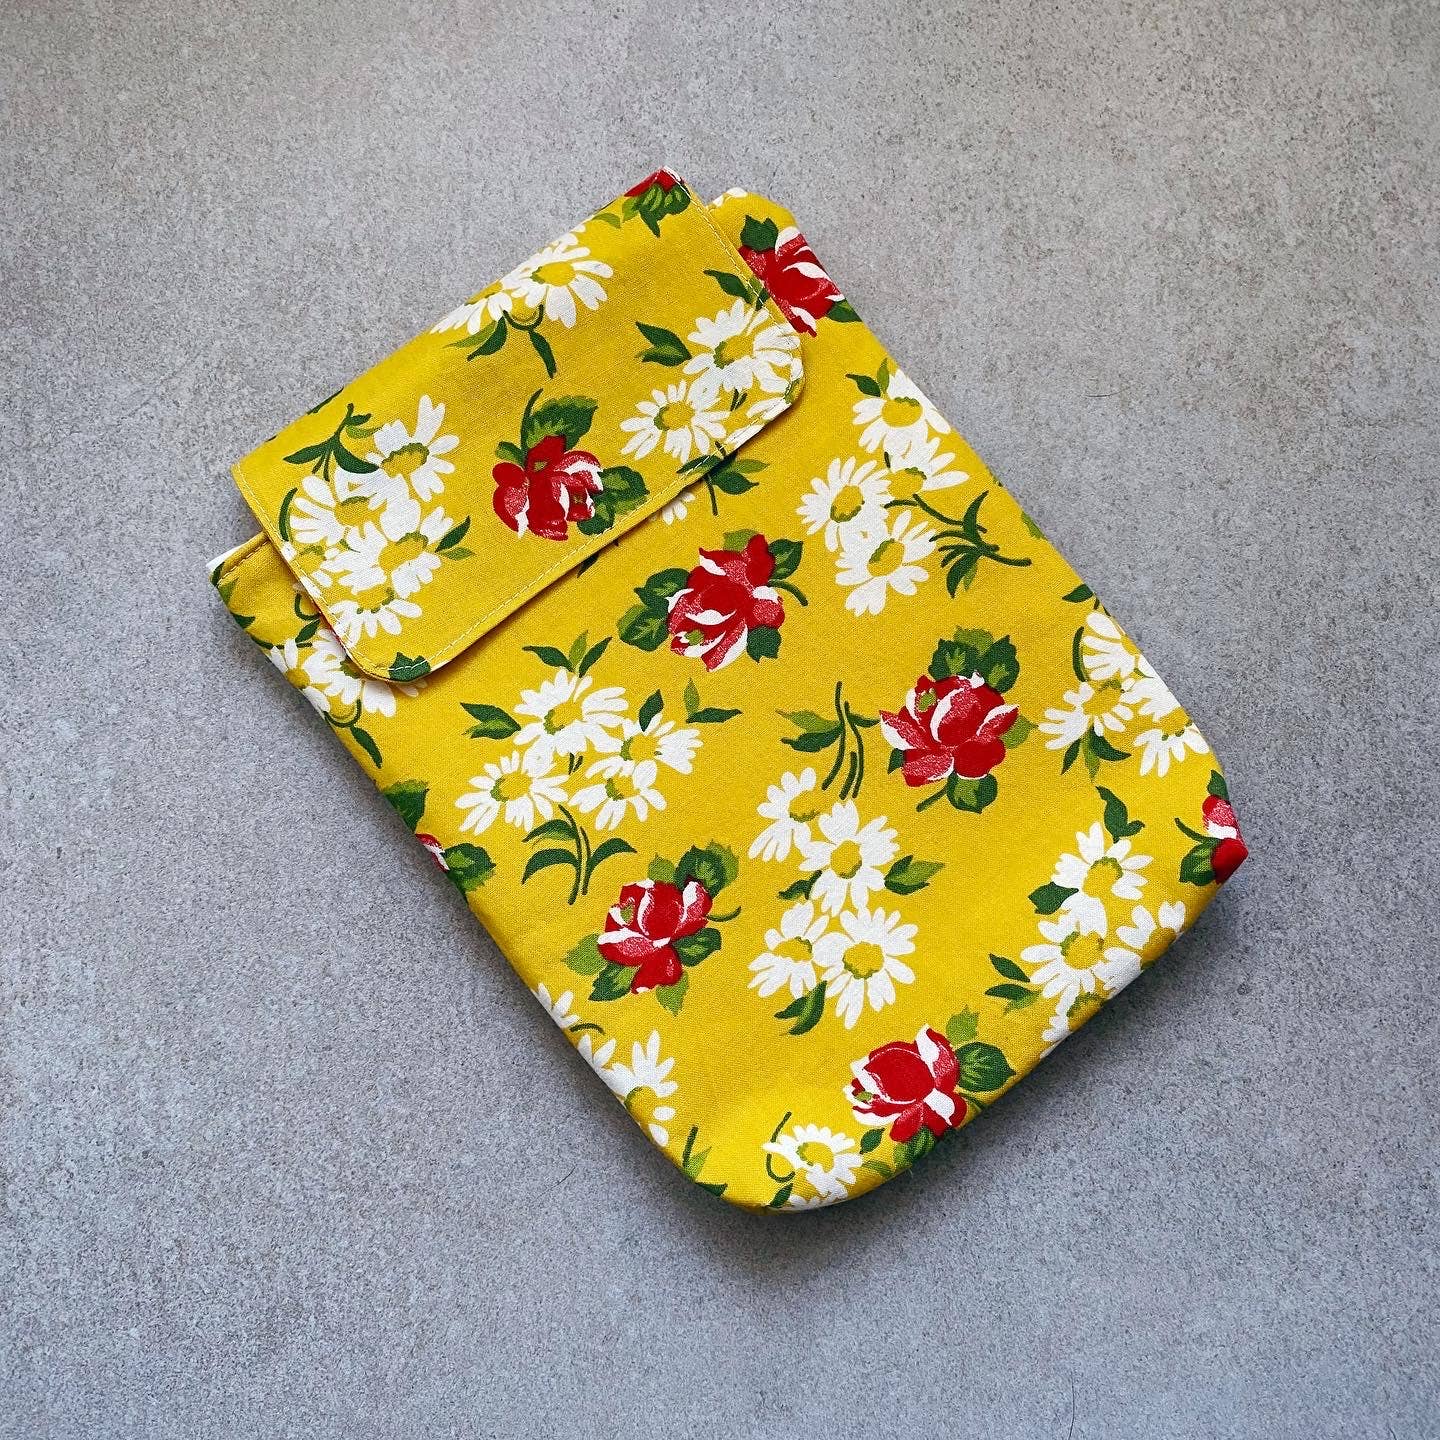 Retro Floral Padded Book Sleeve with Flap Closure